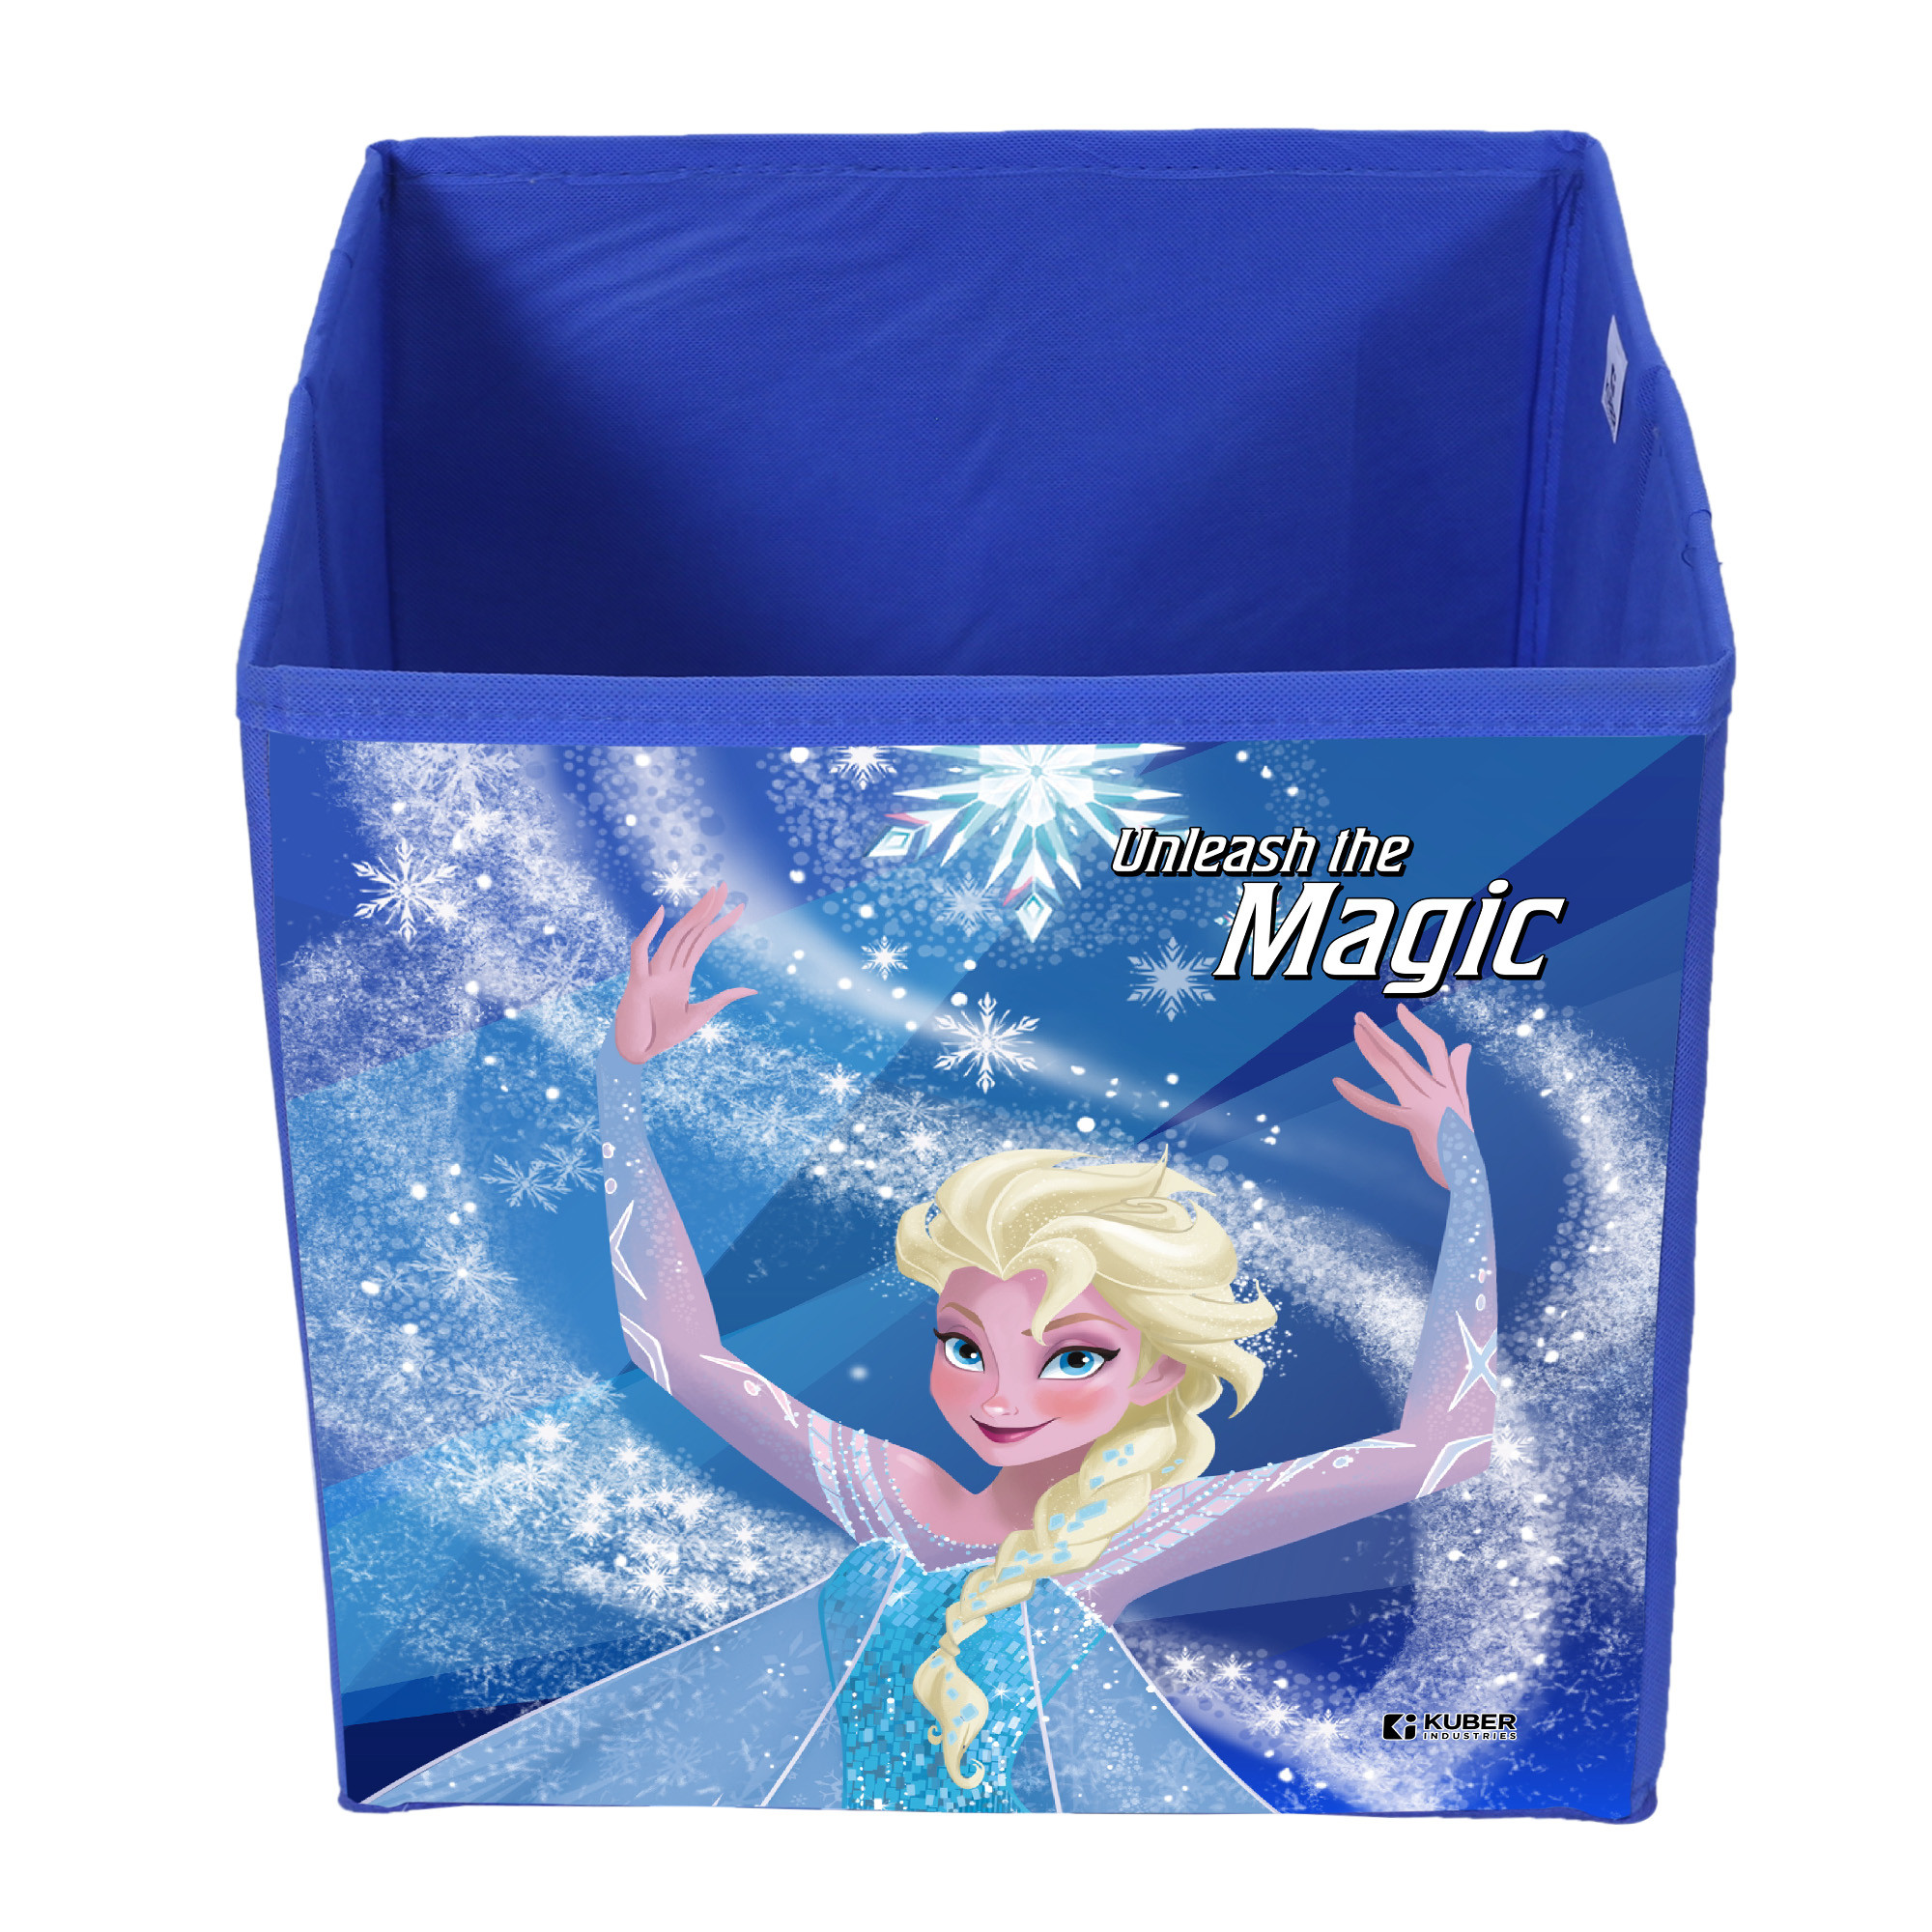 Kuber Industries Disney Frozen Print Foldable Storage Box|Clothes Organizer|Collapsible Storage Basket With Handle For Toys,Books,30 Ltr.(Blue)